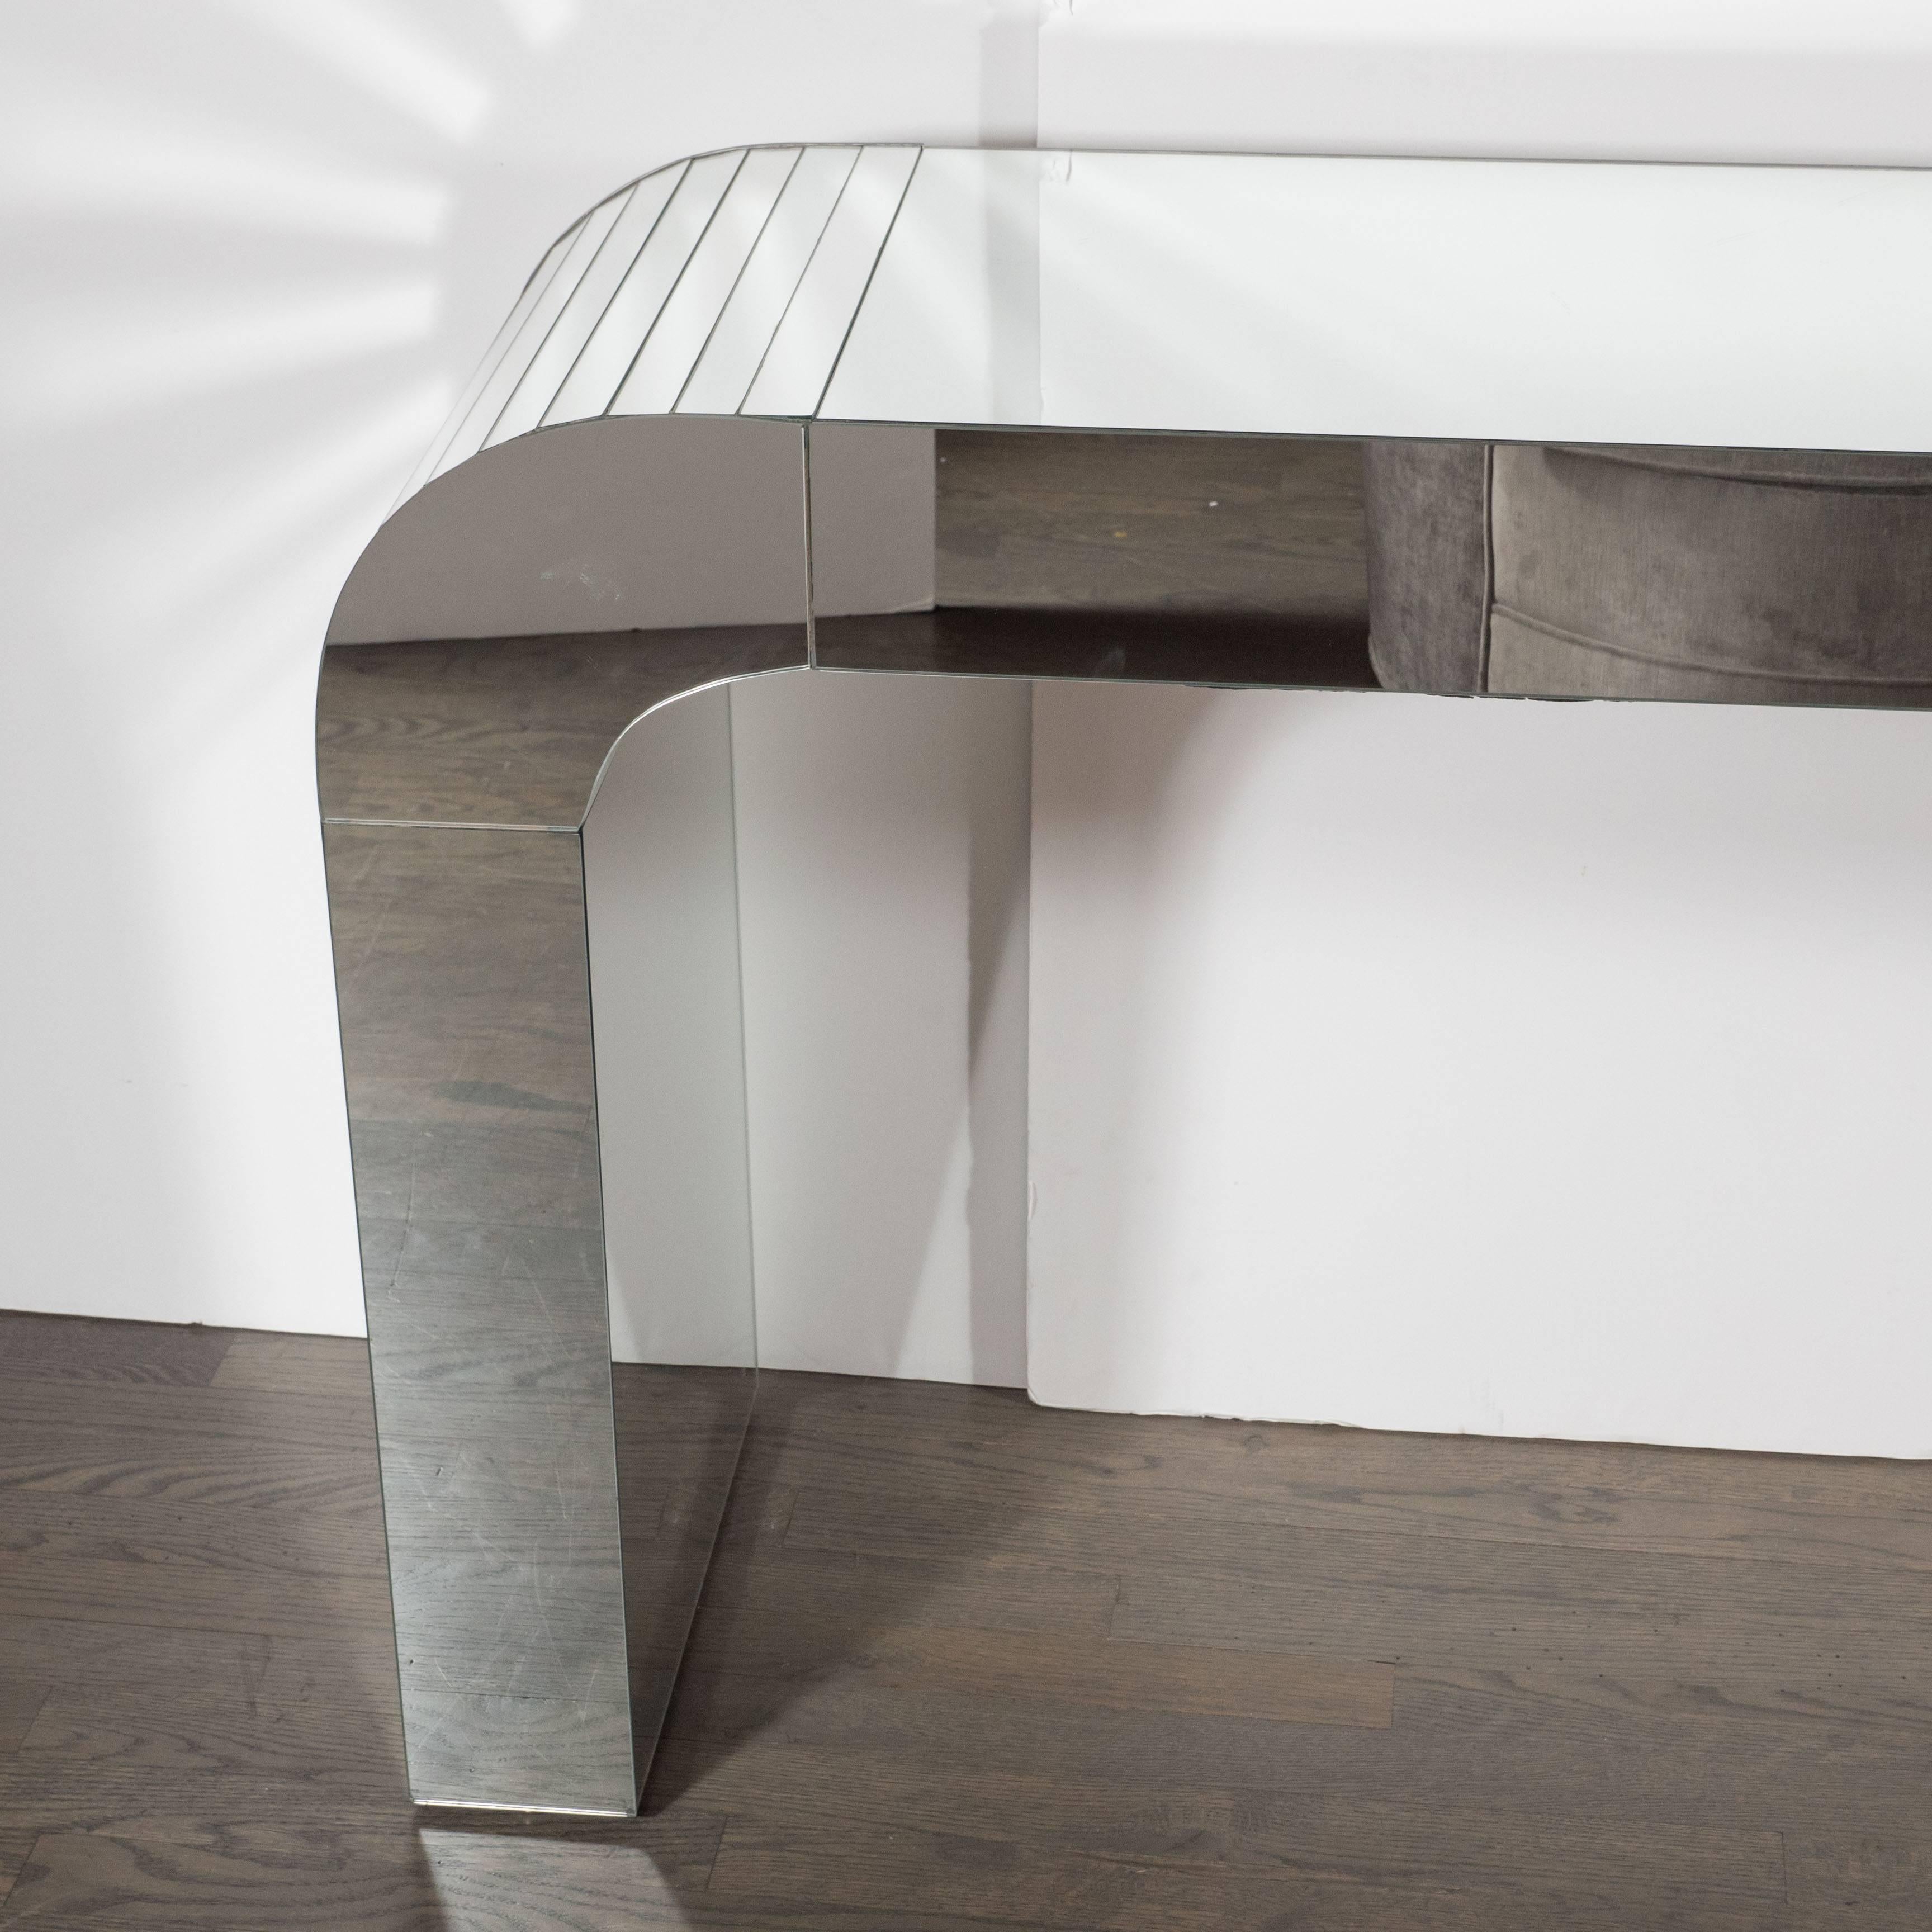 A Mid-Century Modernist arch form mirrored console table. A fully covered arch-form console is covered in segments of mirrored glass. This piece could also be used as a writing desk or vanity or console table. Its fully mirrored sides allow it to be